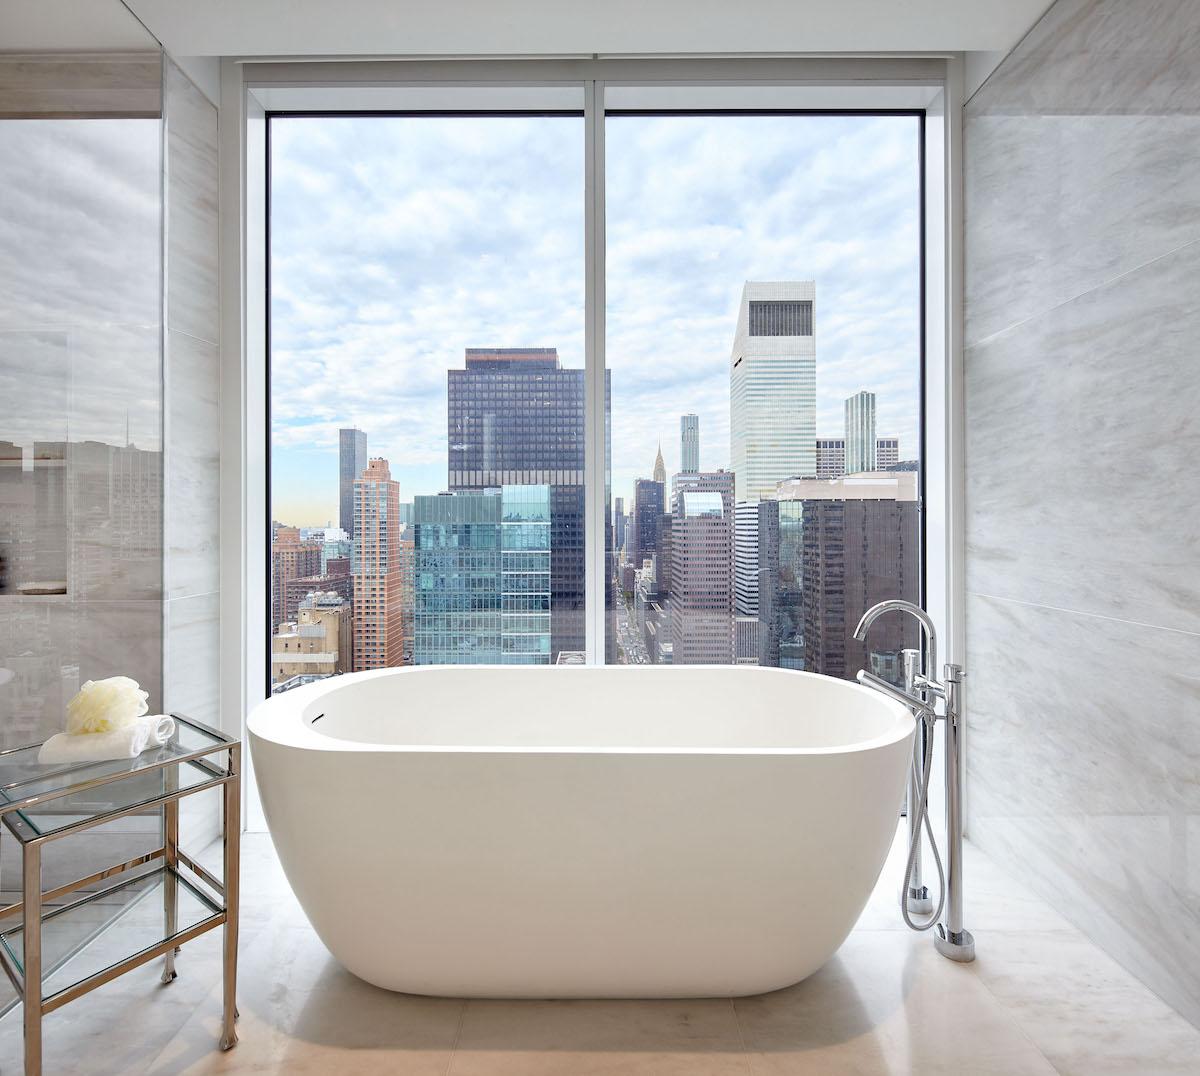 200 East 59th Street Blends Manhattan's Energy with Miami's Allure